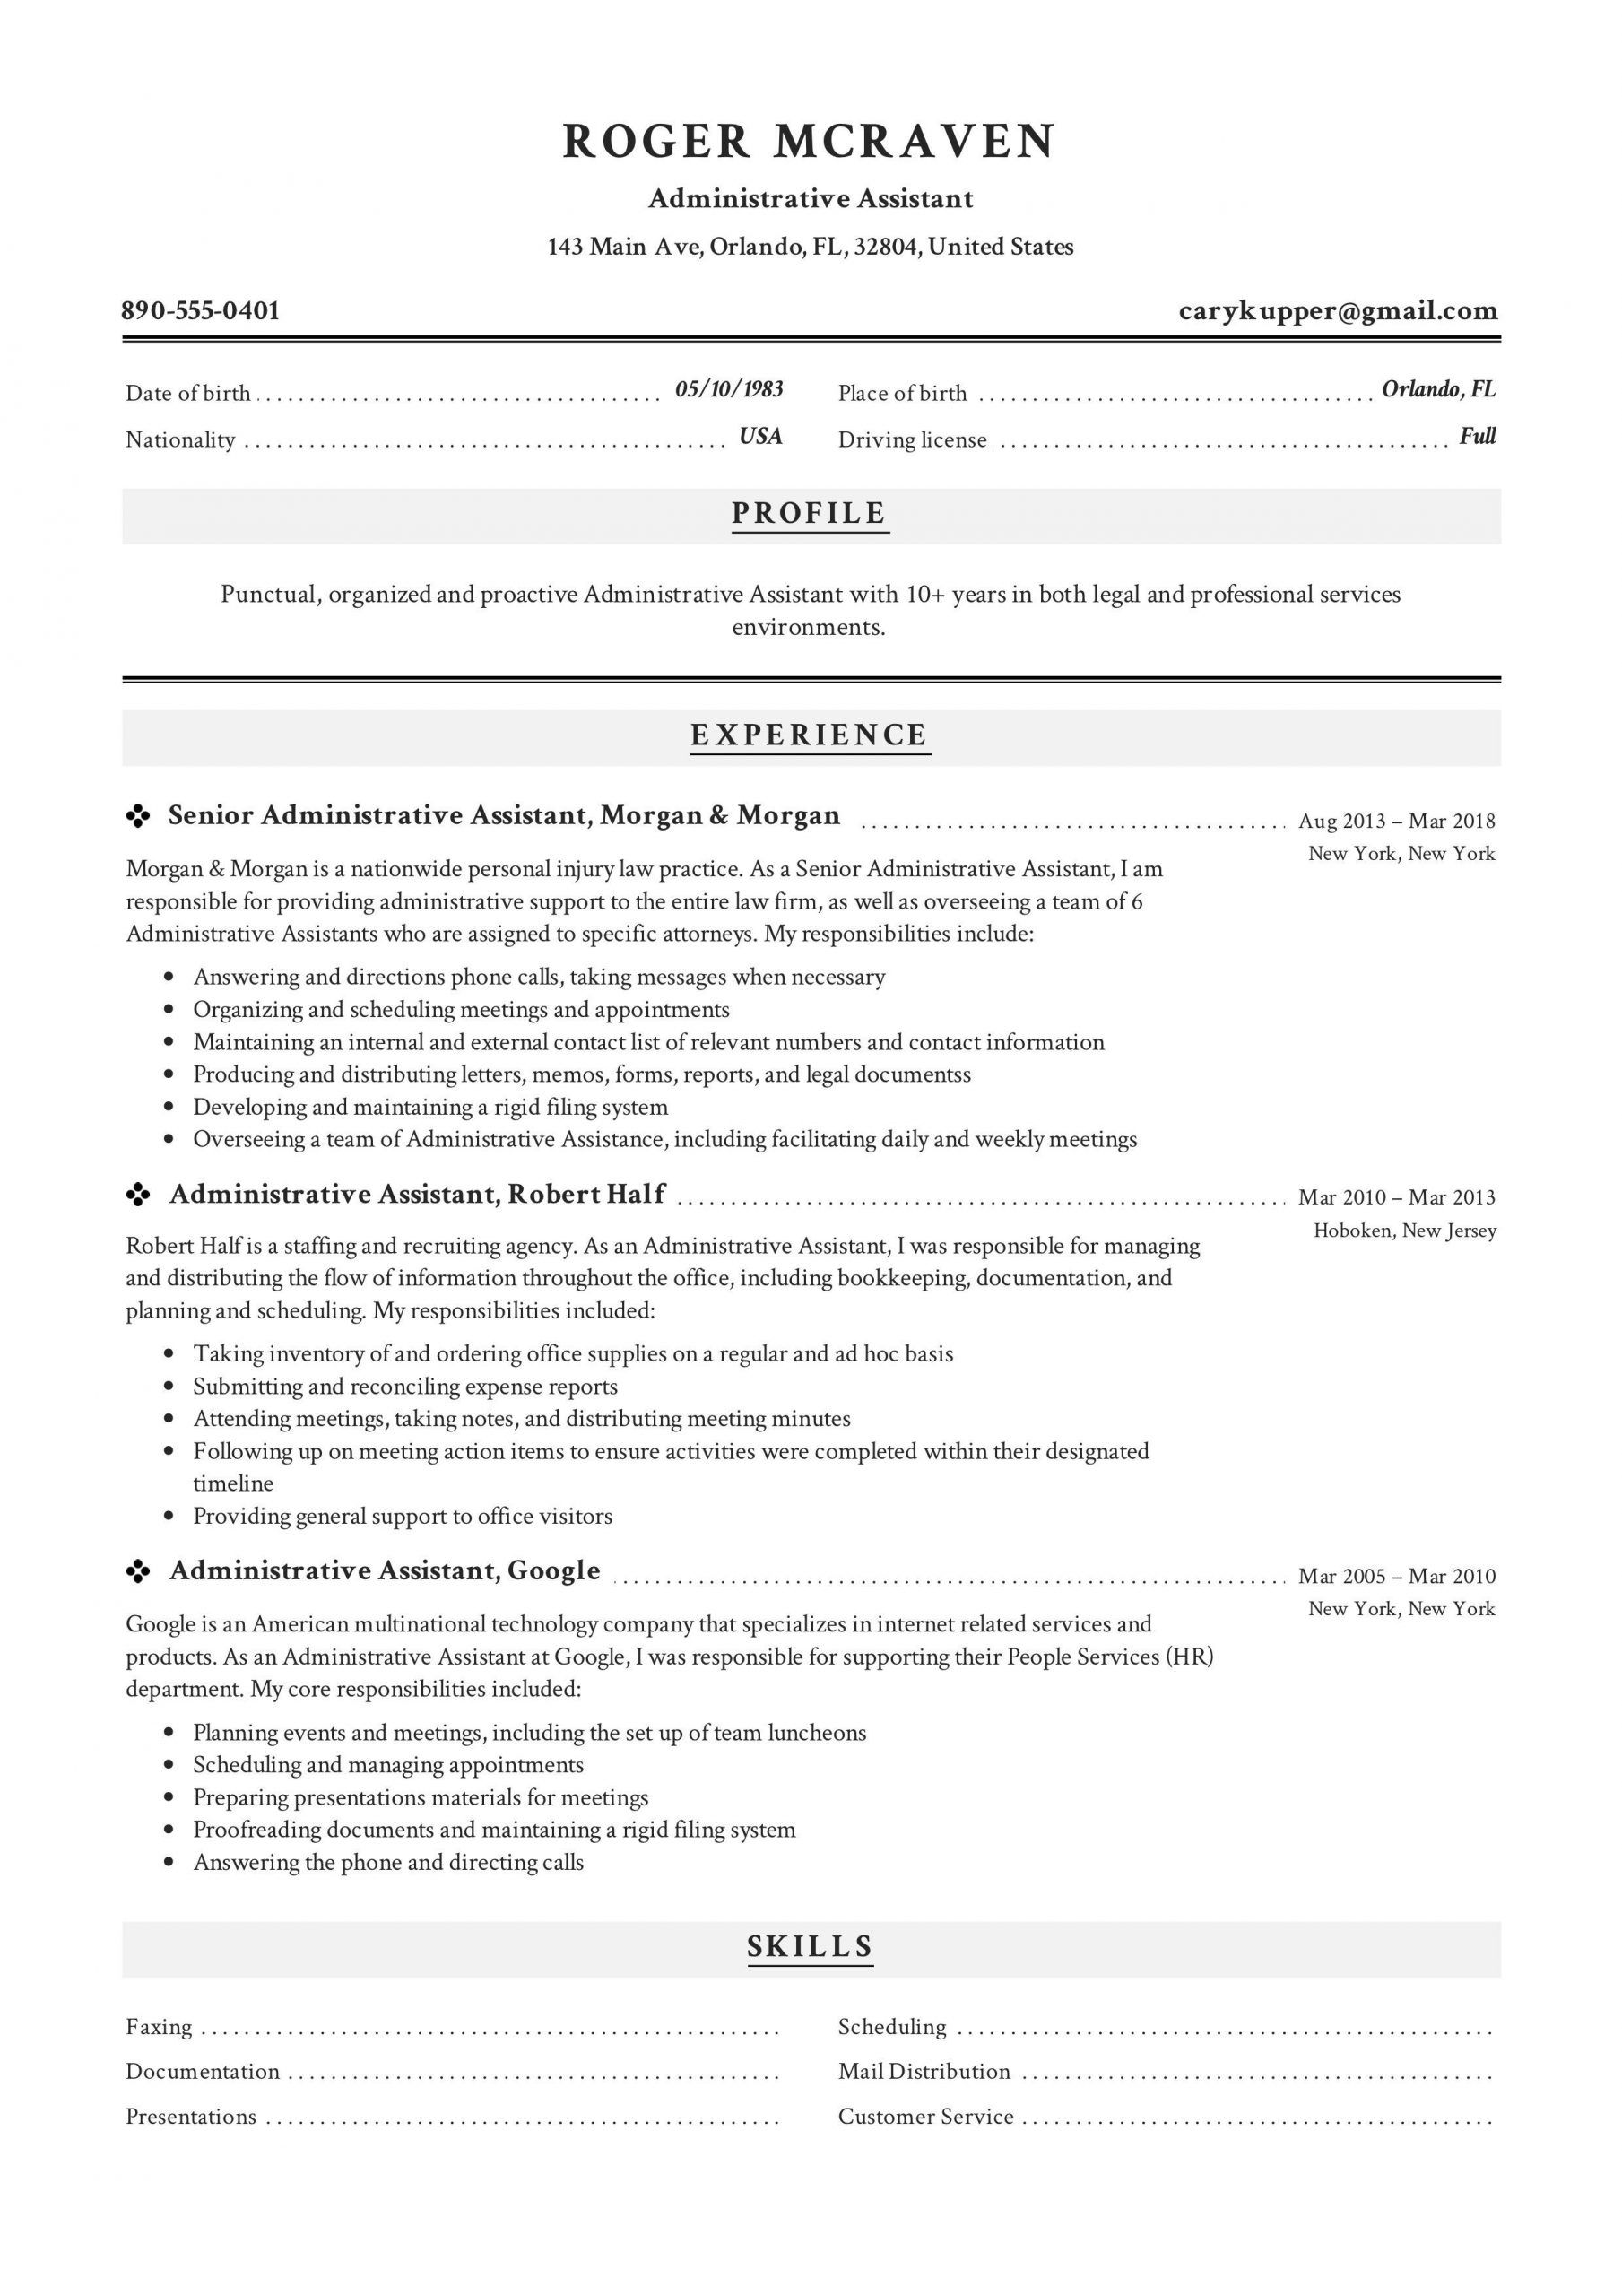 Sample Resume for Healthcare Administrative assistant Free Administrative assistant Resume Sample, Template, Example, Cv …